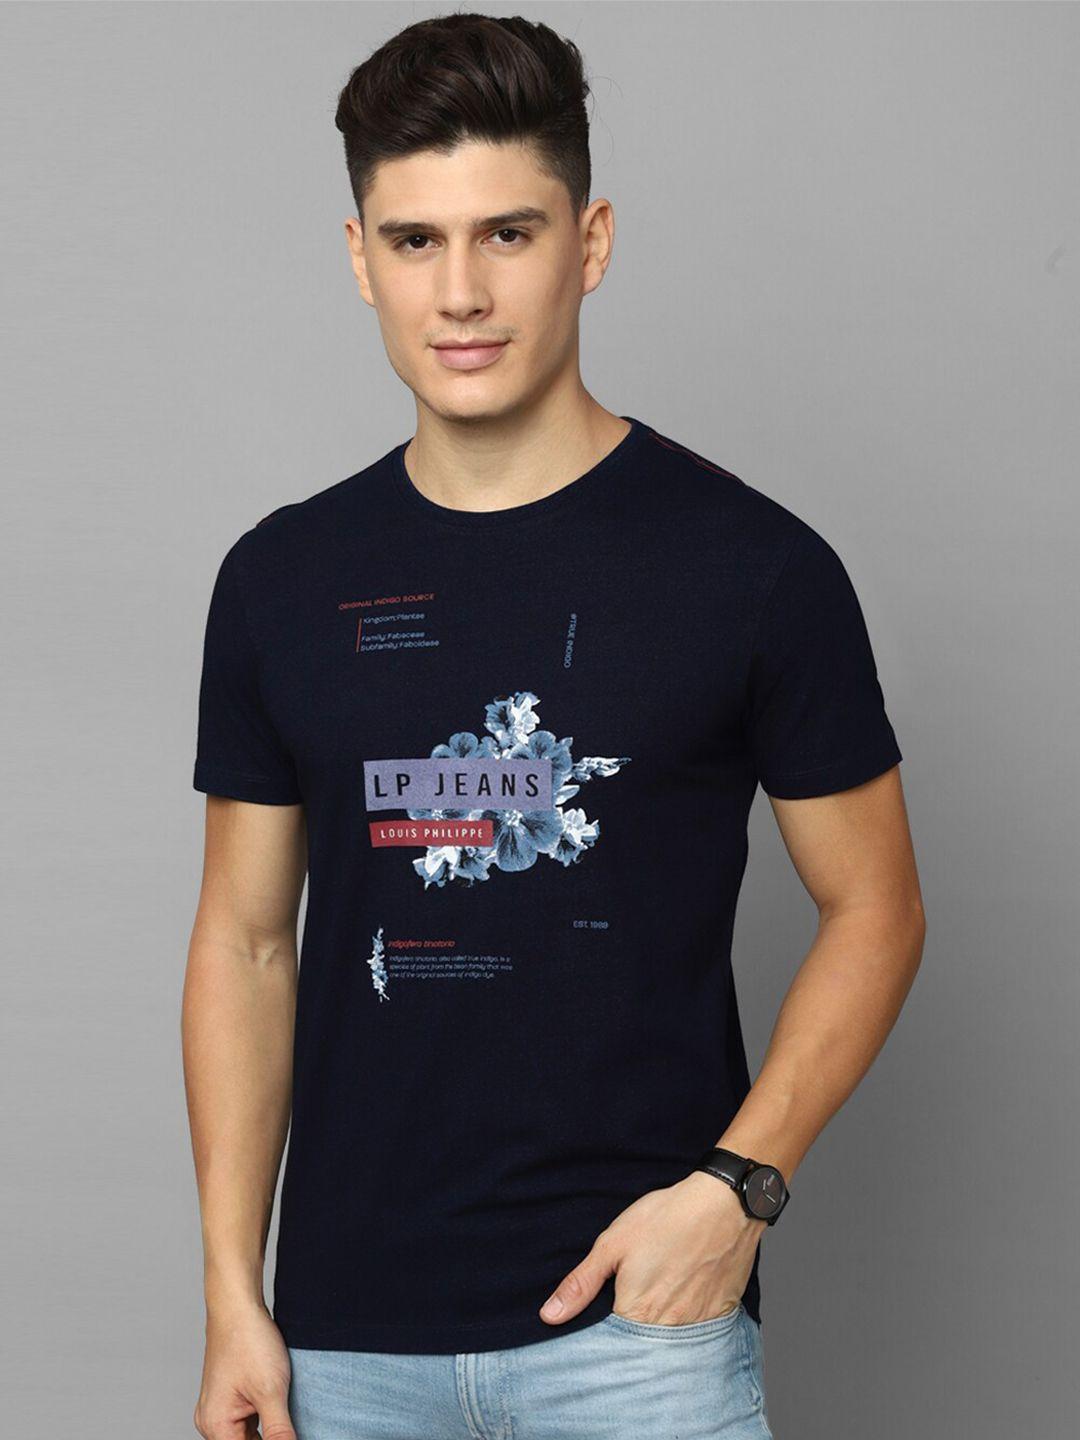 louis-philippe-jeans-typography-printed-slim-fit-pure-cotton-t-shirt